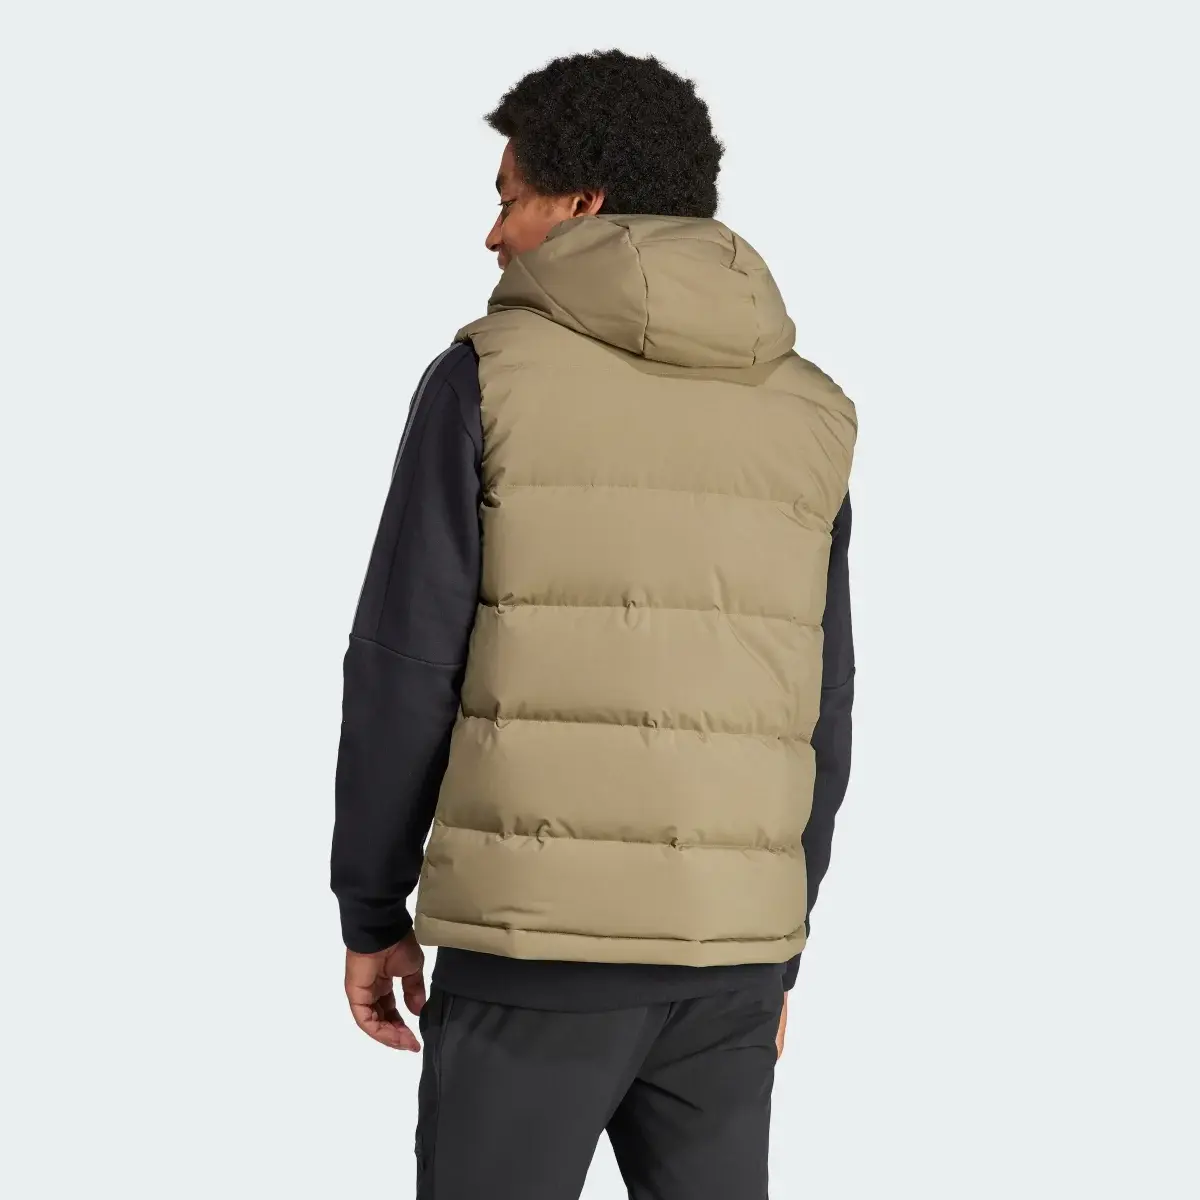 Adidas Helionic Hooded Down Vest. 3